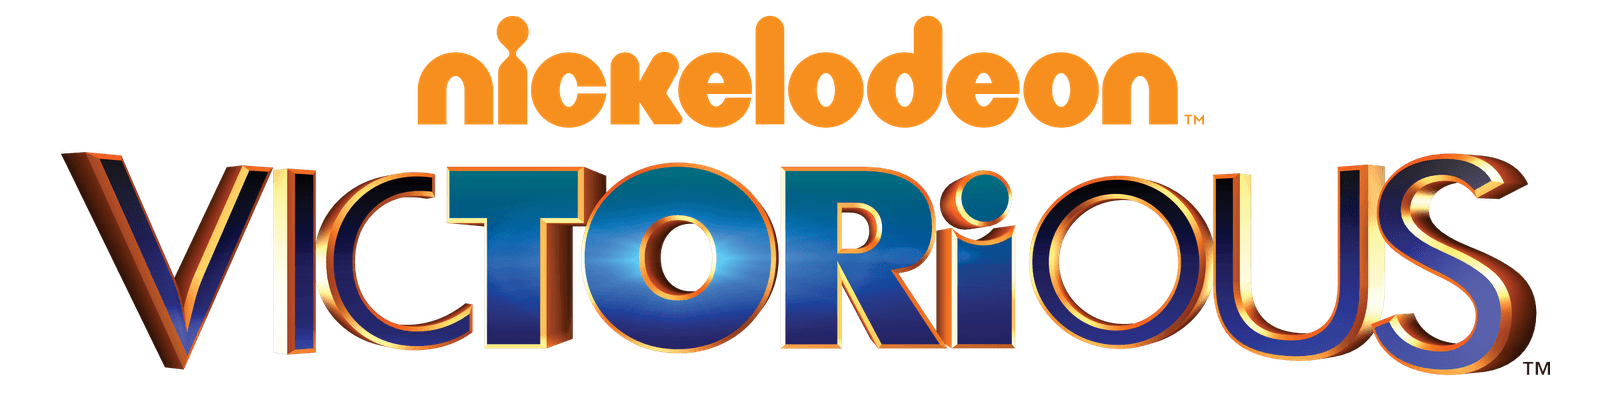 Victorious Logo - Victorious | Logopedia | FANDOM powered by Wikia